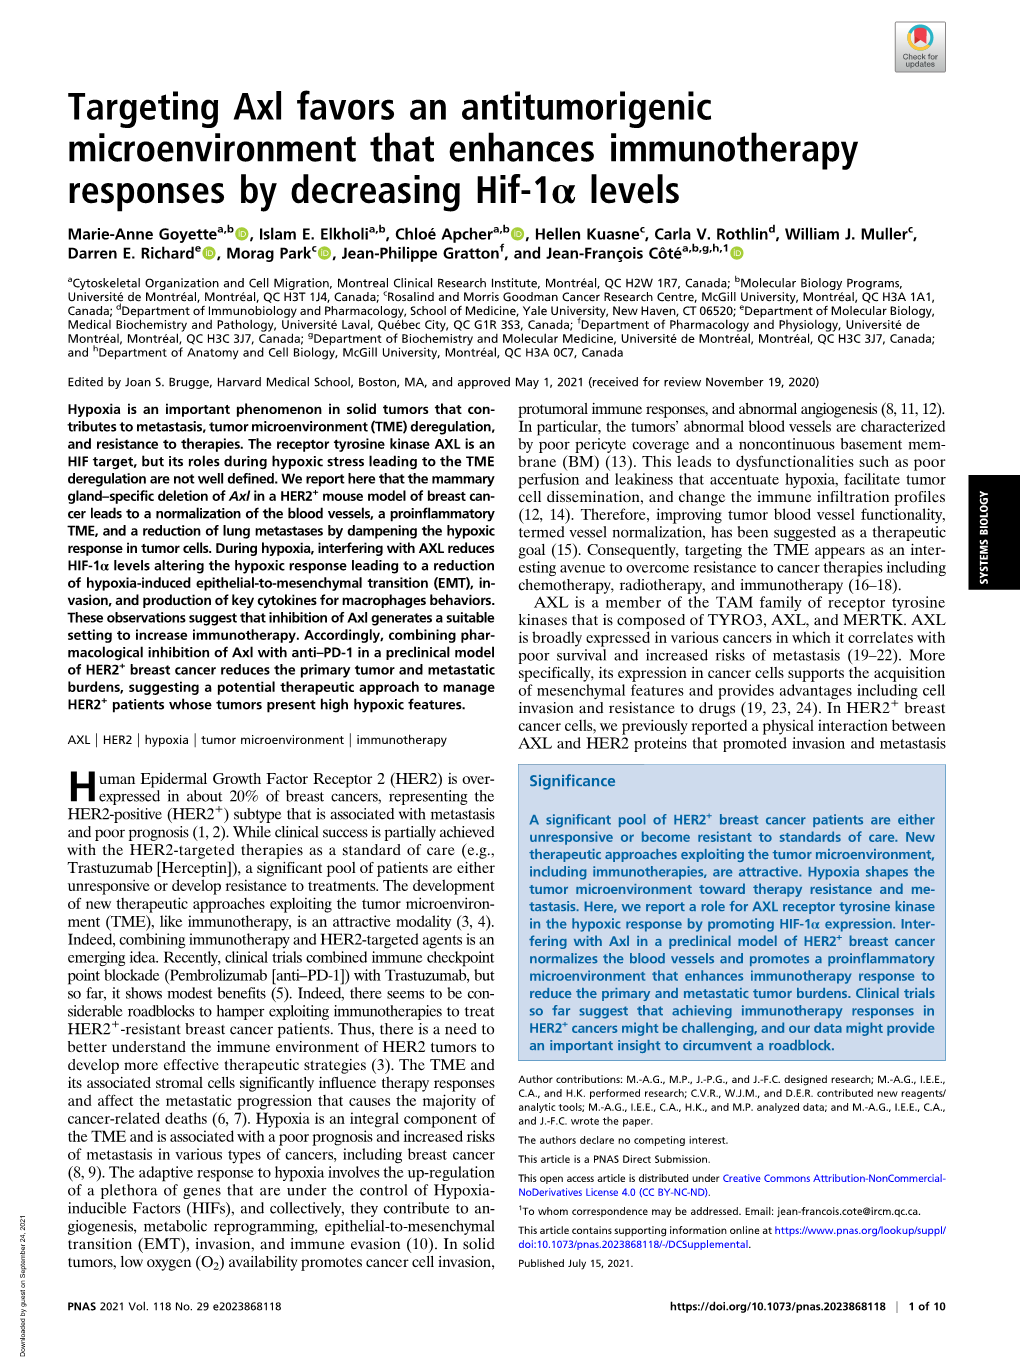 Targeting Axl Favors an Antitumorigenic Microenvironment That Enhances Immunotherapy Responses by Decreasing Hif-1Α Levels